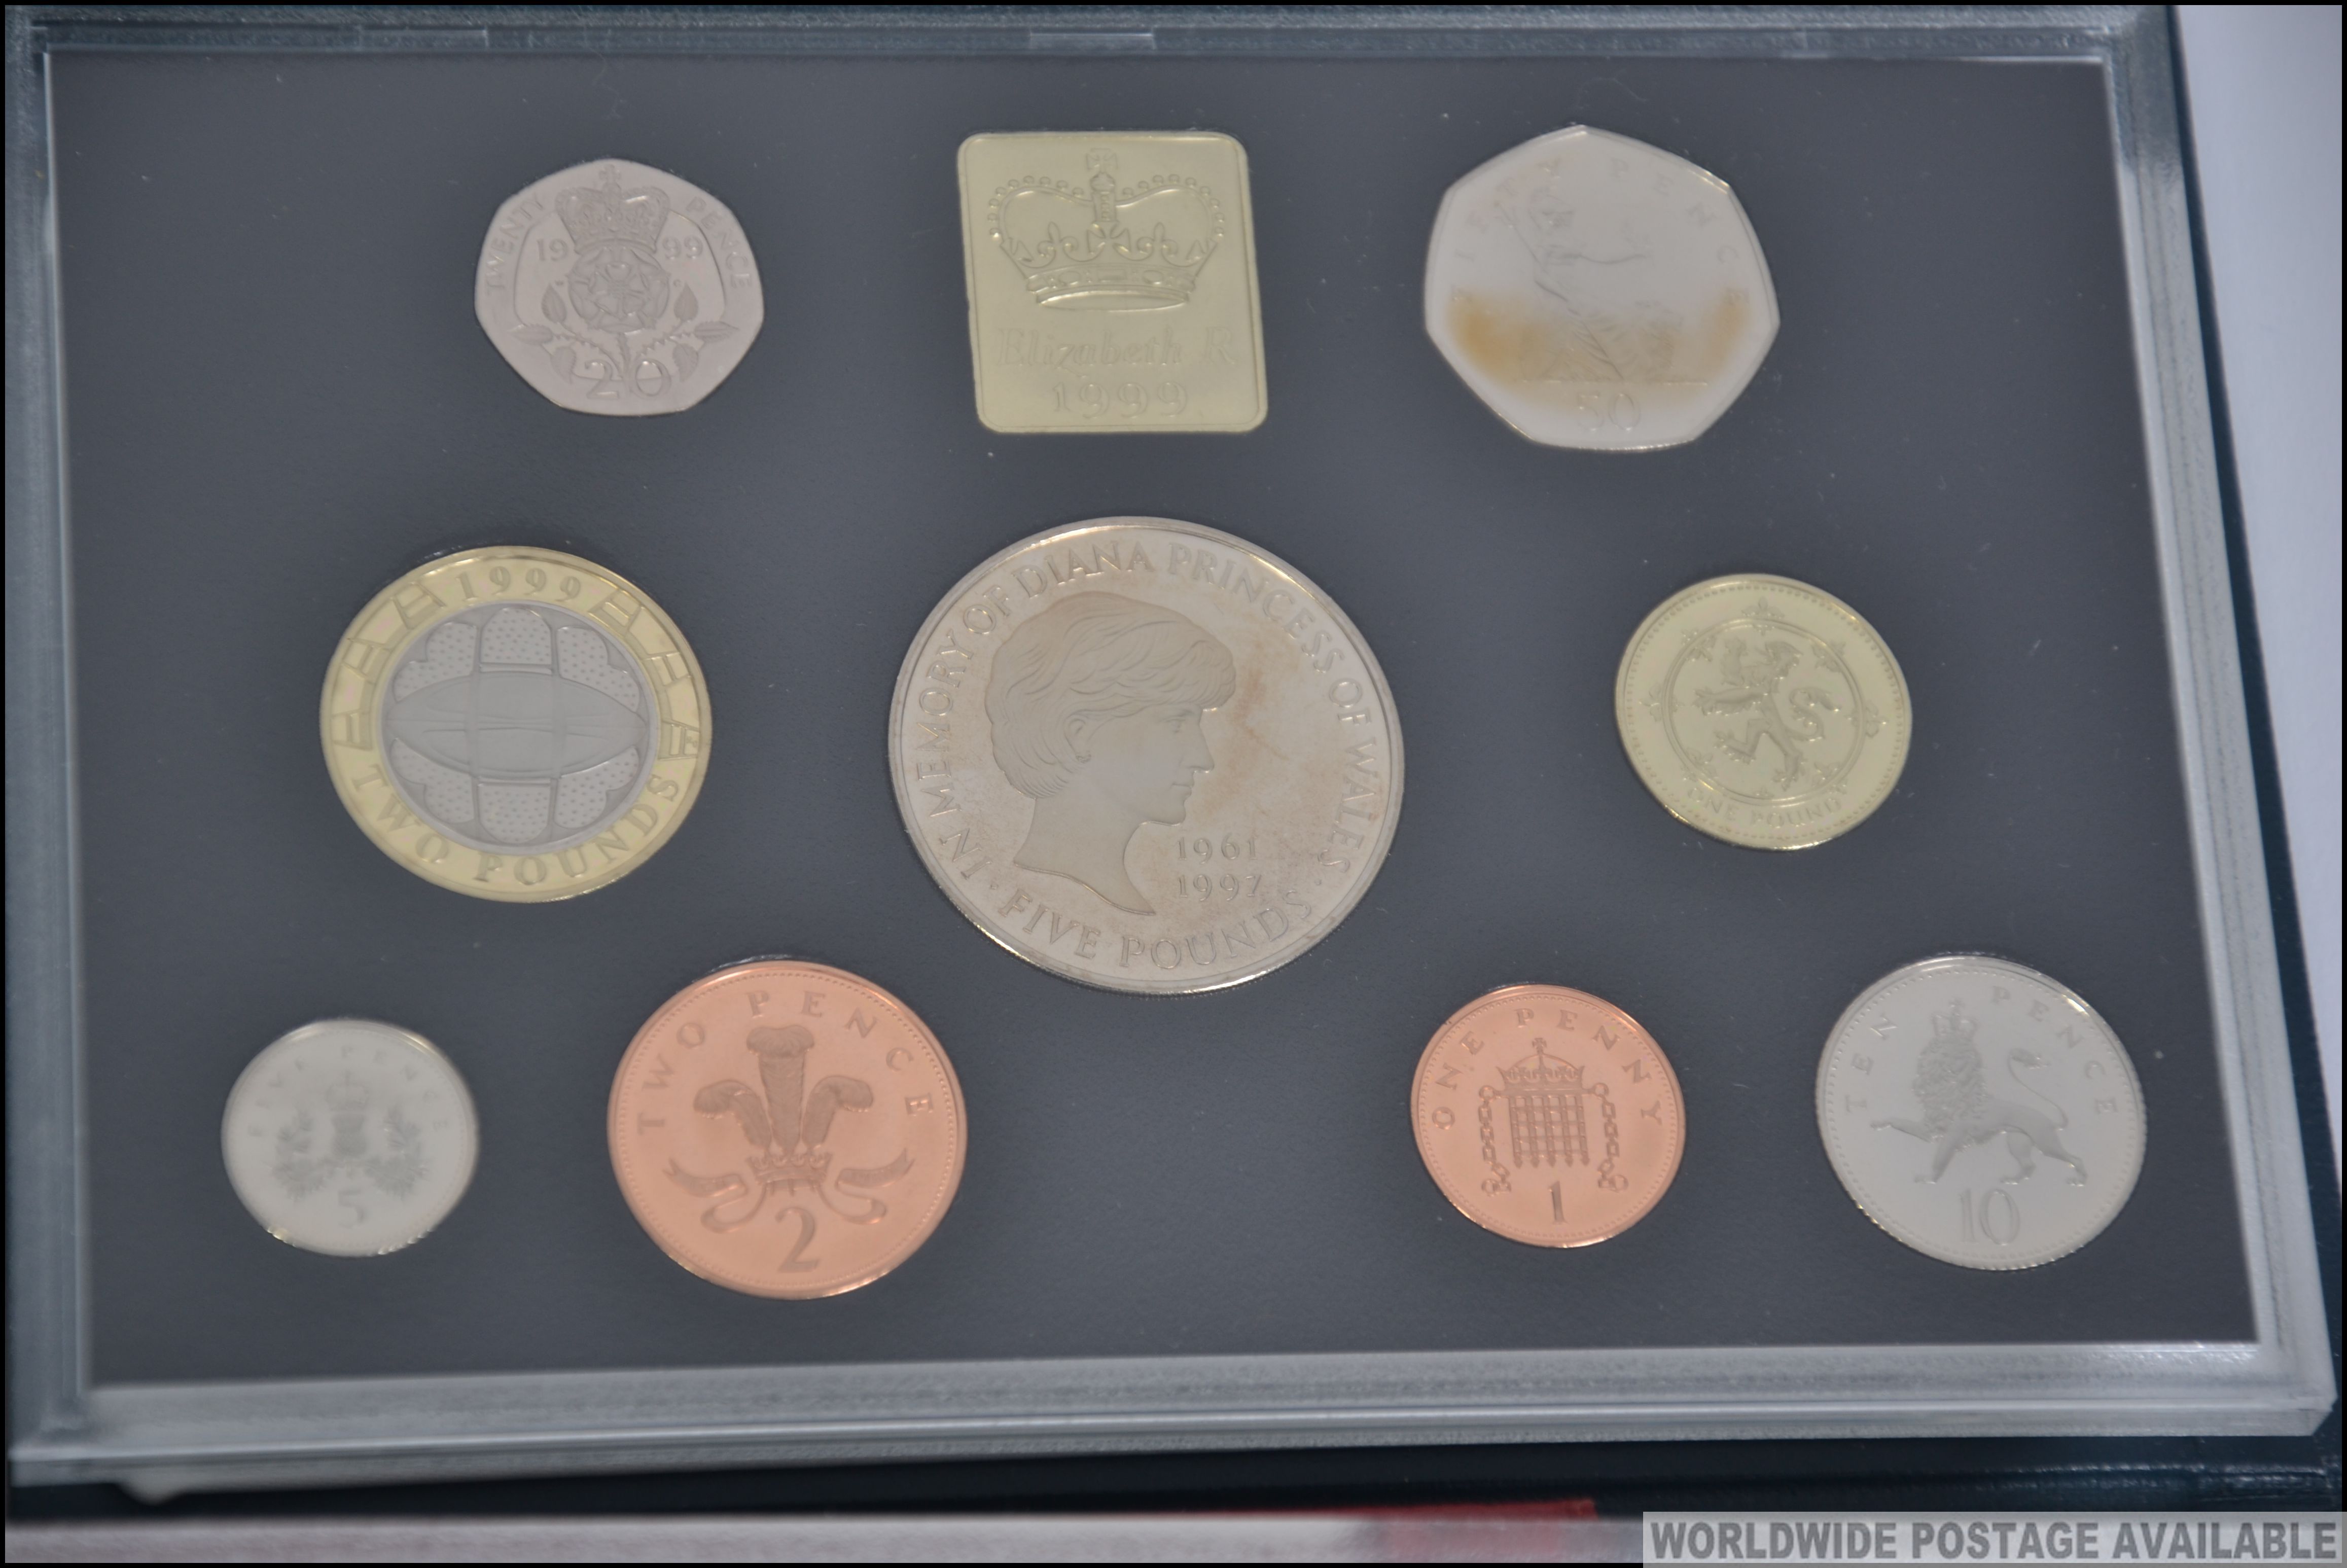 A collection of 3 United Kingdom proof coin sets 1999 x 2 and a 2001 de-lux proof set all with - Image 2 of 5